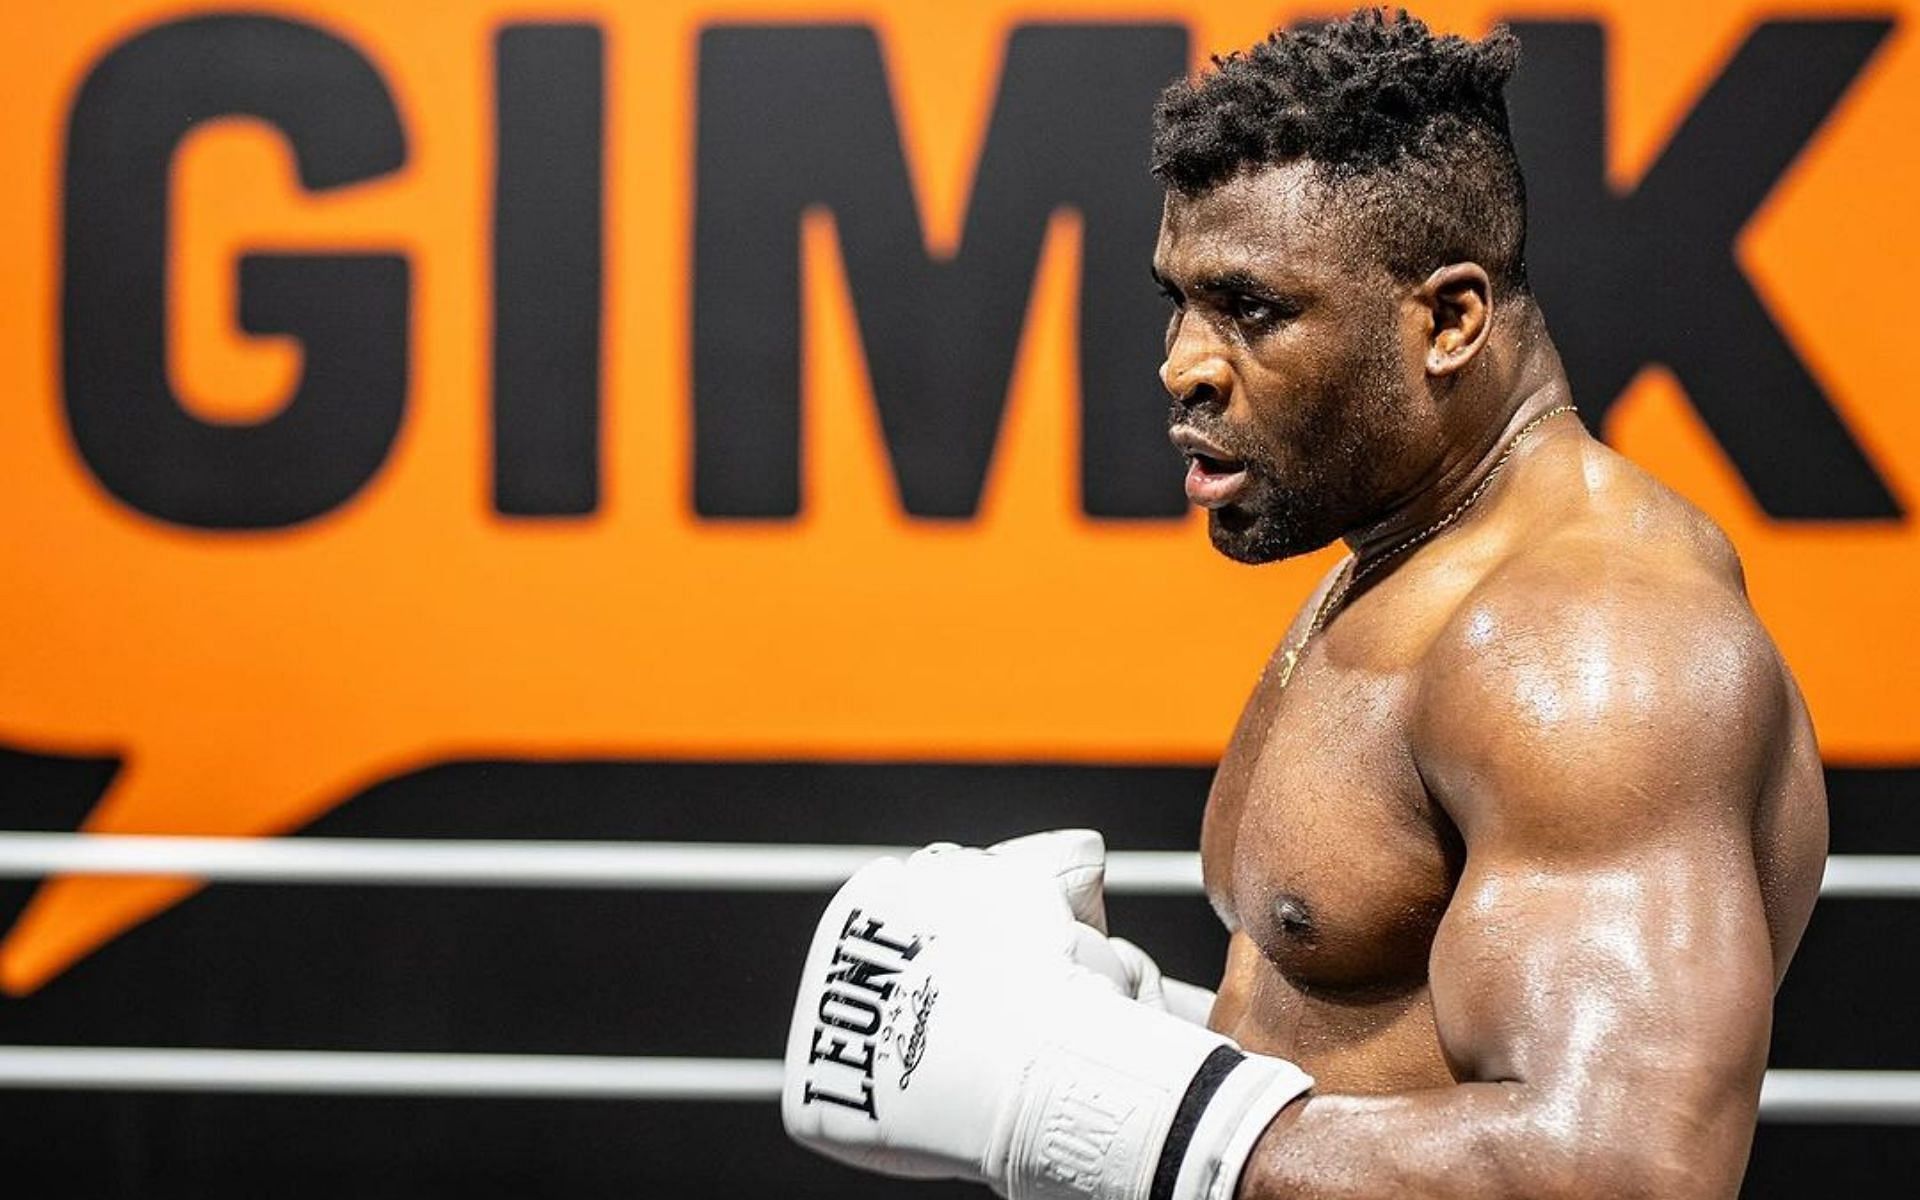 MMA fighter and boxer Francis Ngannou [Image credits: @francisngannou on Instagram]